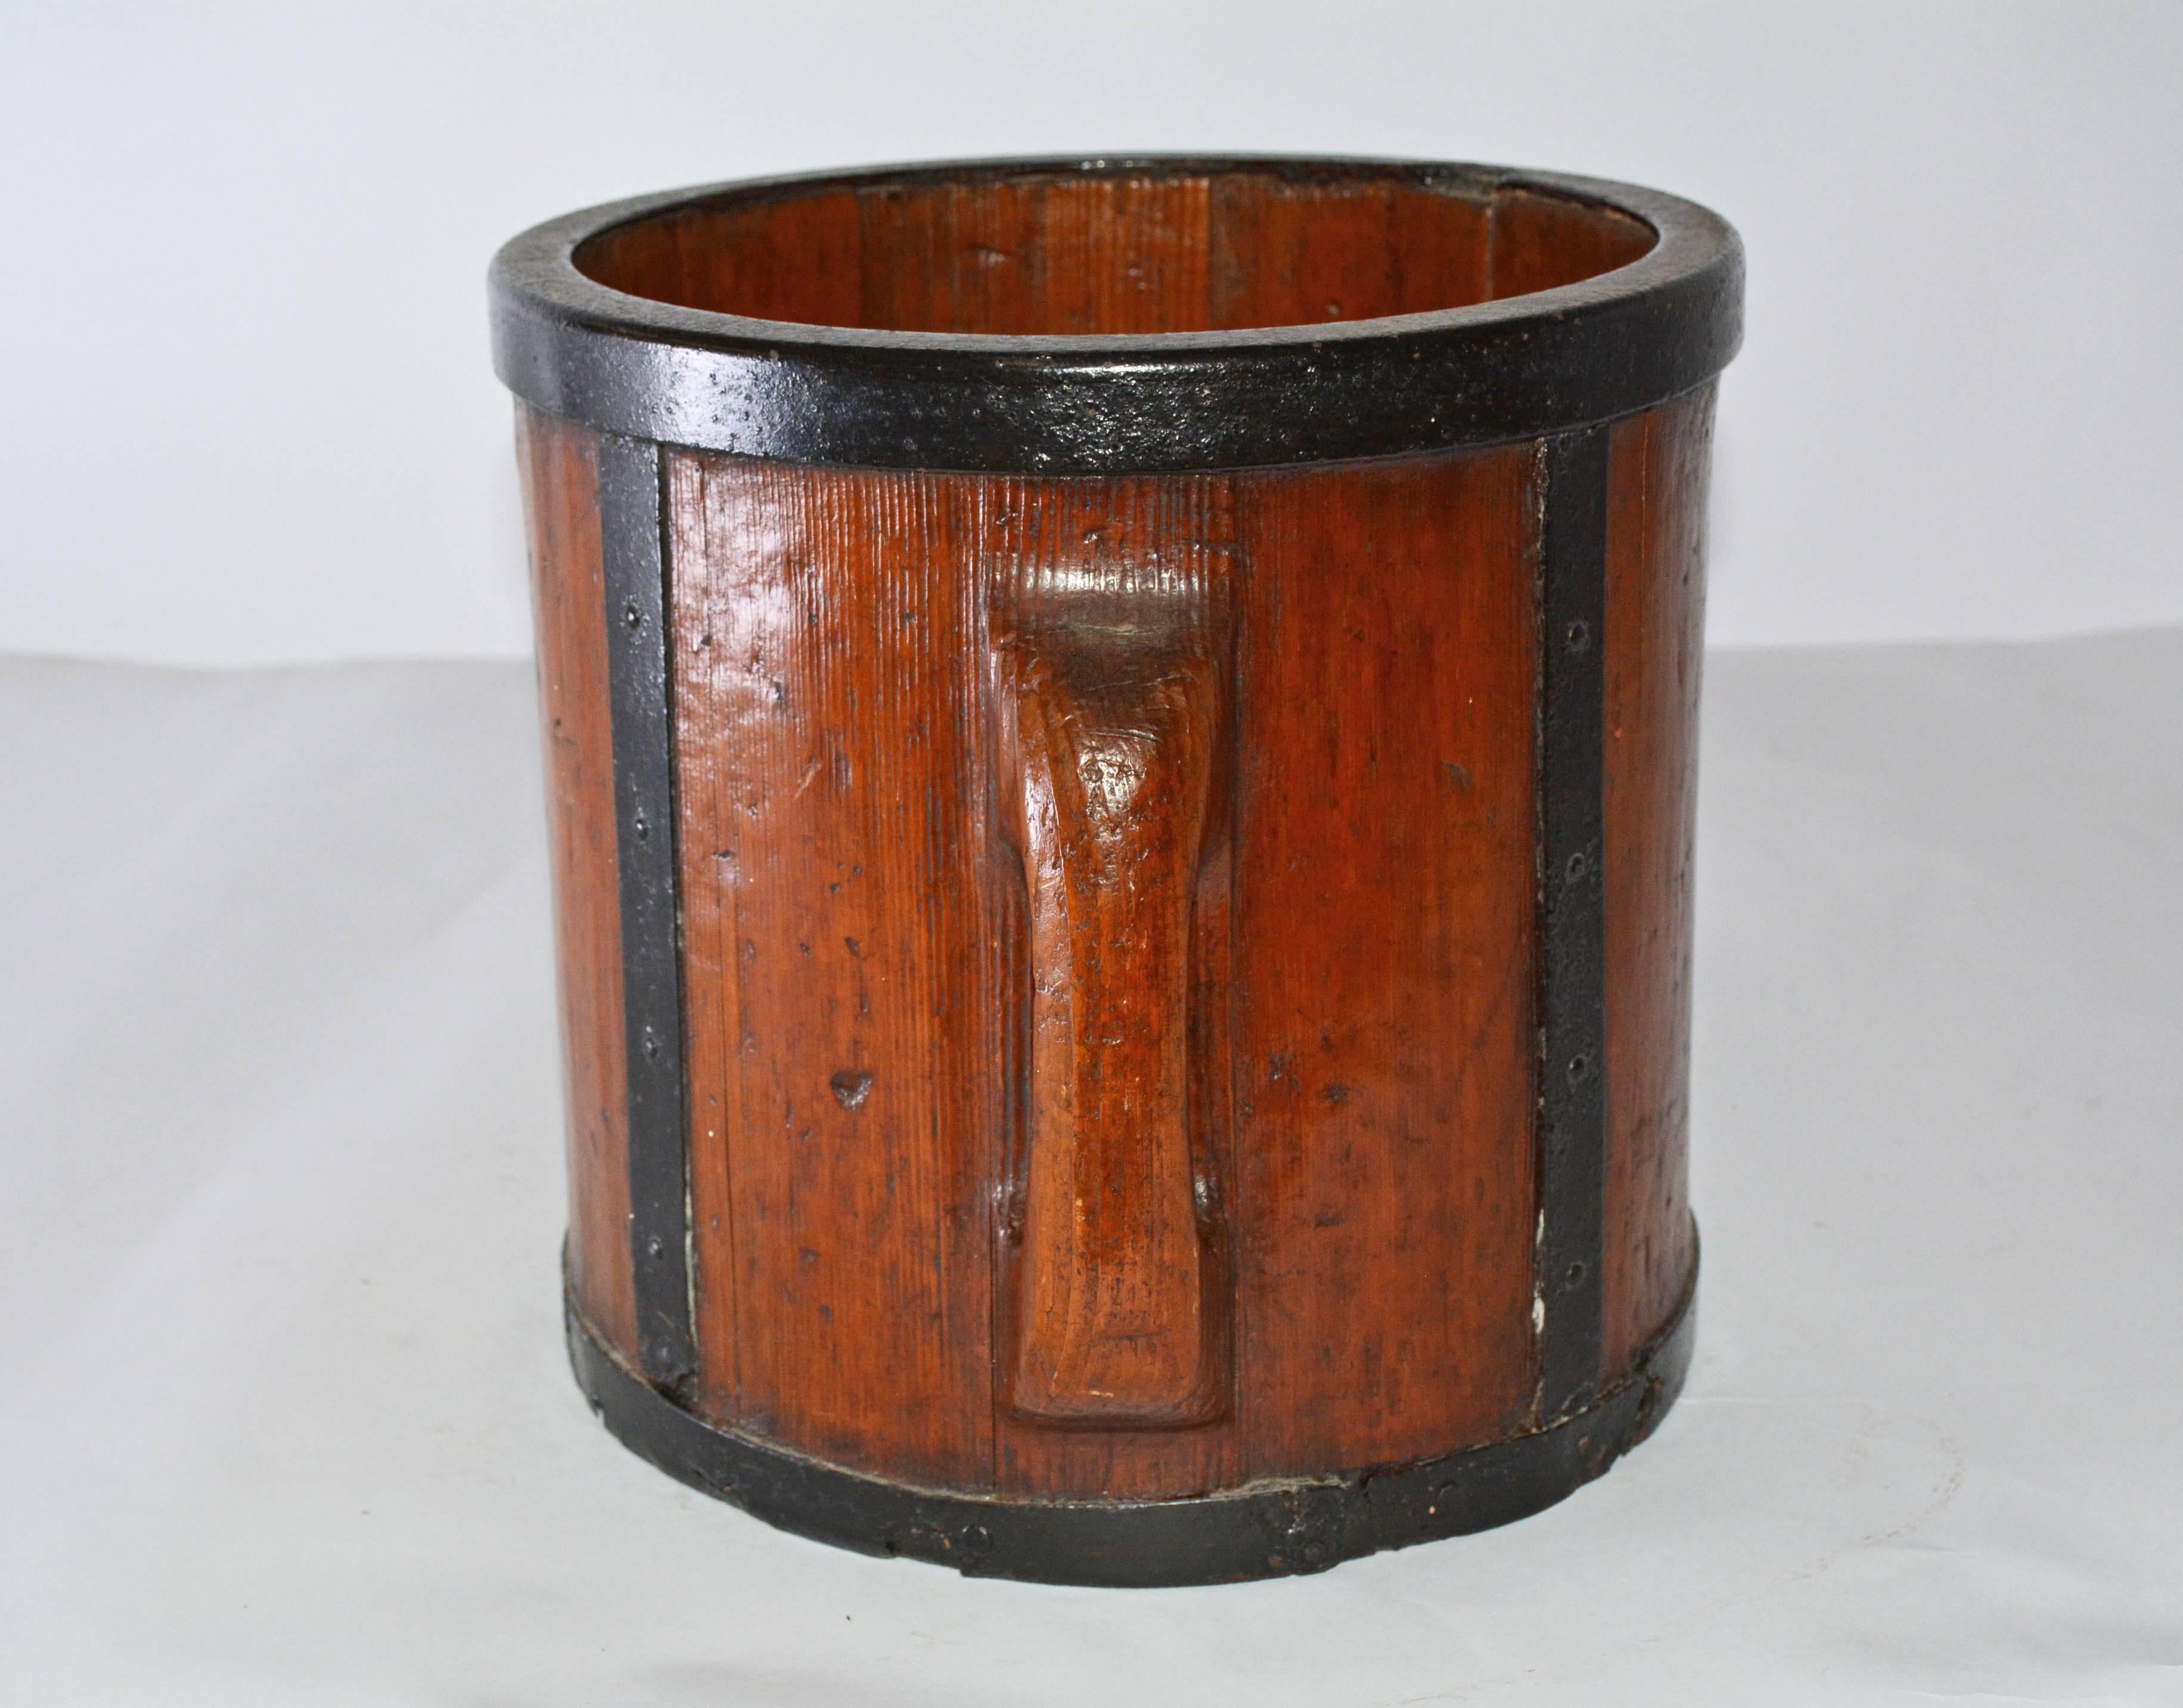 The antique Chinese wood bucket has two handles and iron straps on the sides and bottom. The surfaces are lacquered. Used originally for measuring rice or grain.